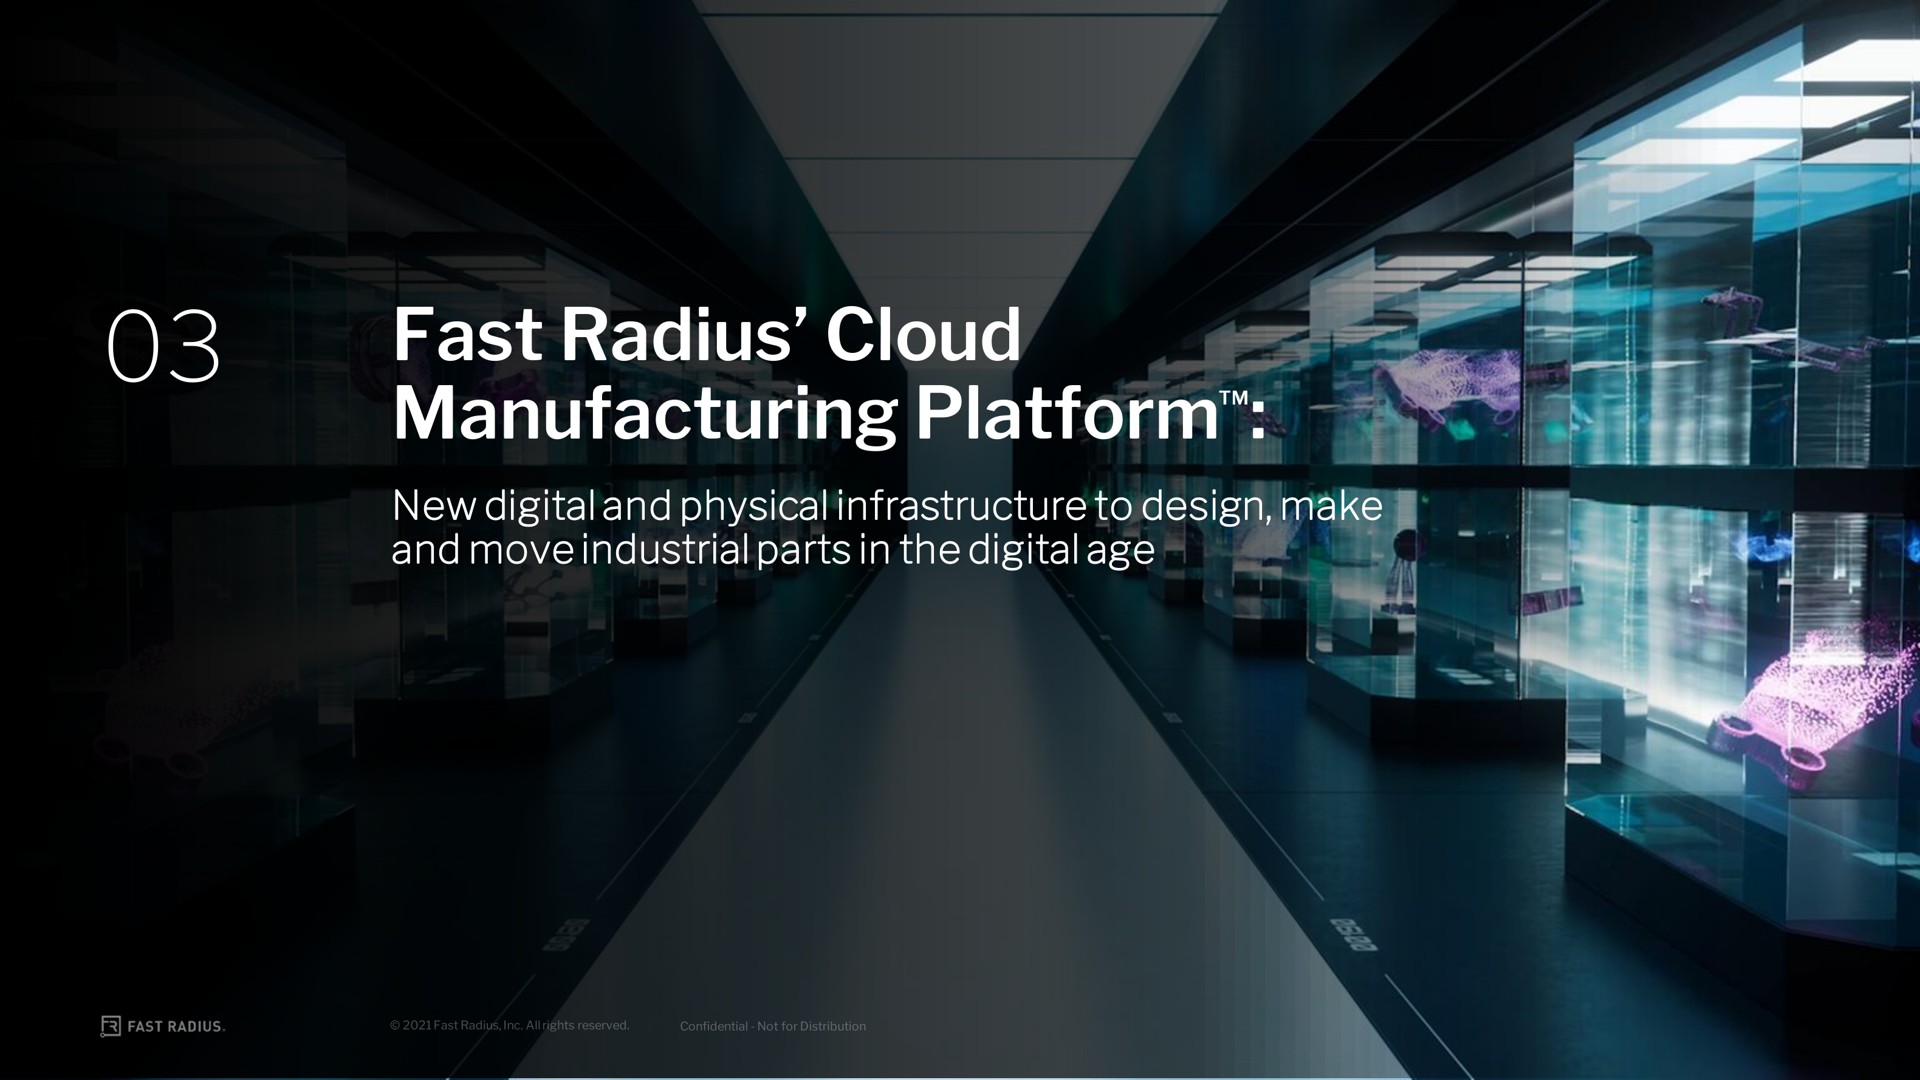 fast radius cloud manufacturing platform new digital and physical infrastructure to design make and move industrial parts in the digital age | Fast Radius